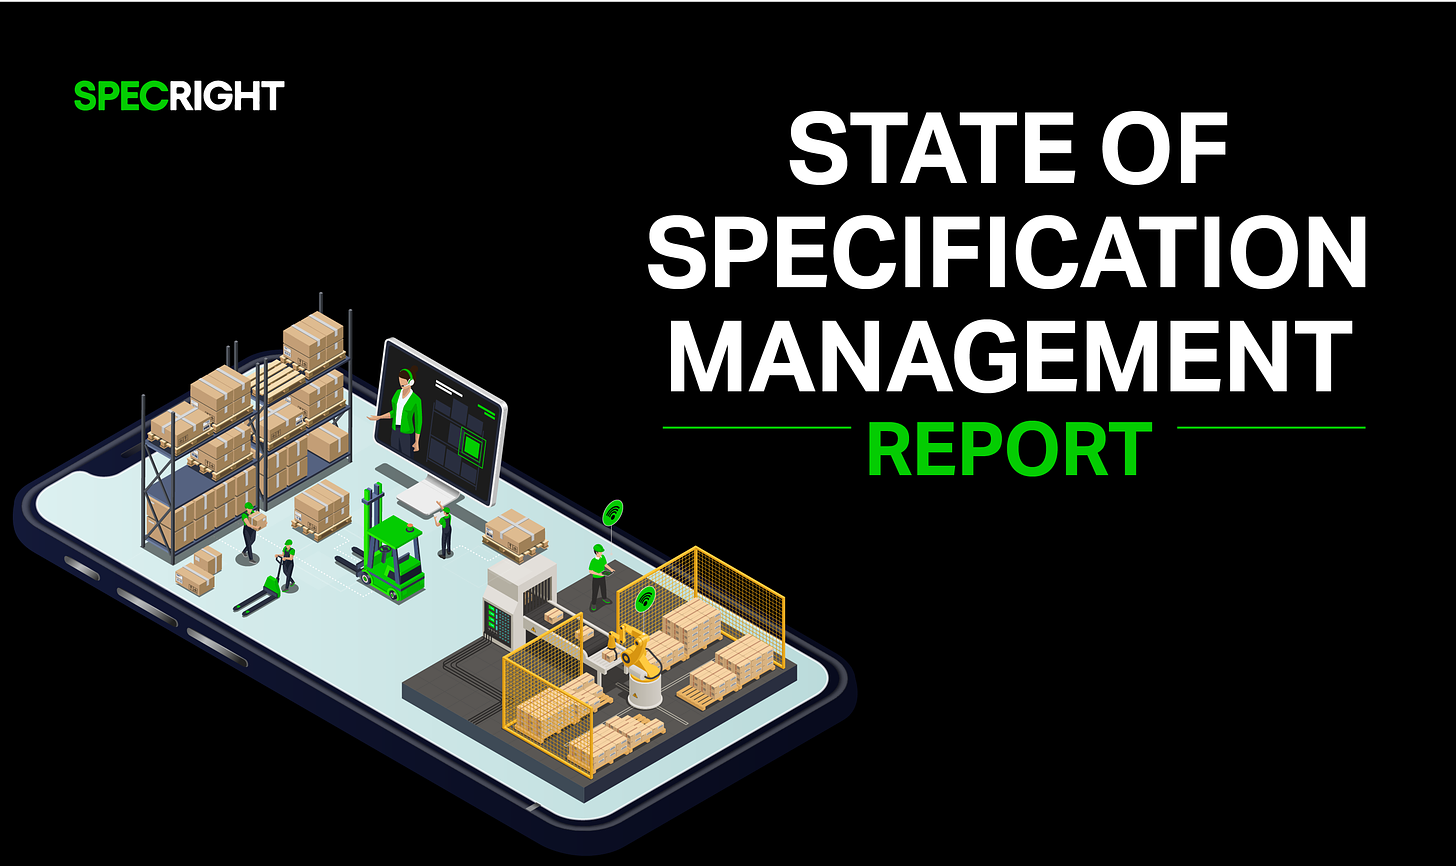 The #1 Platform for Specification Management | Specright